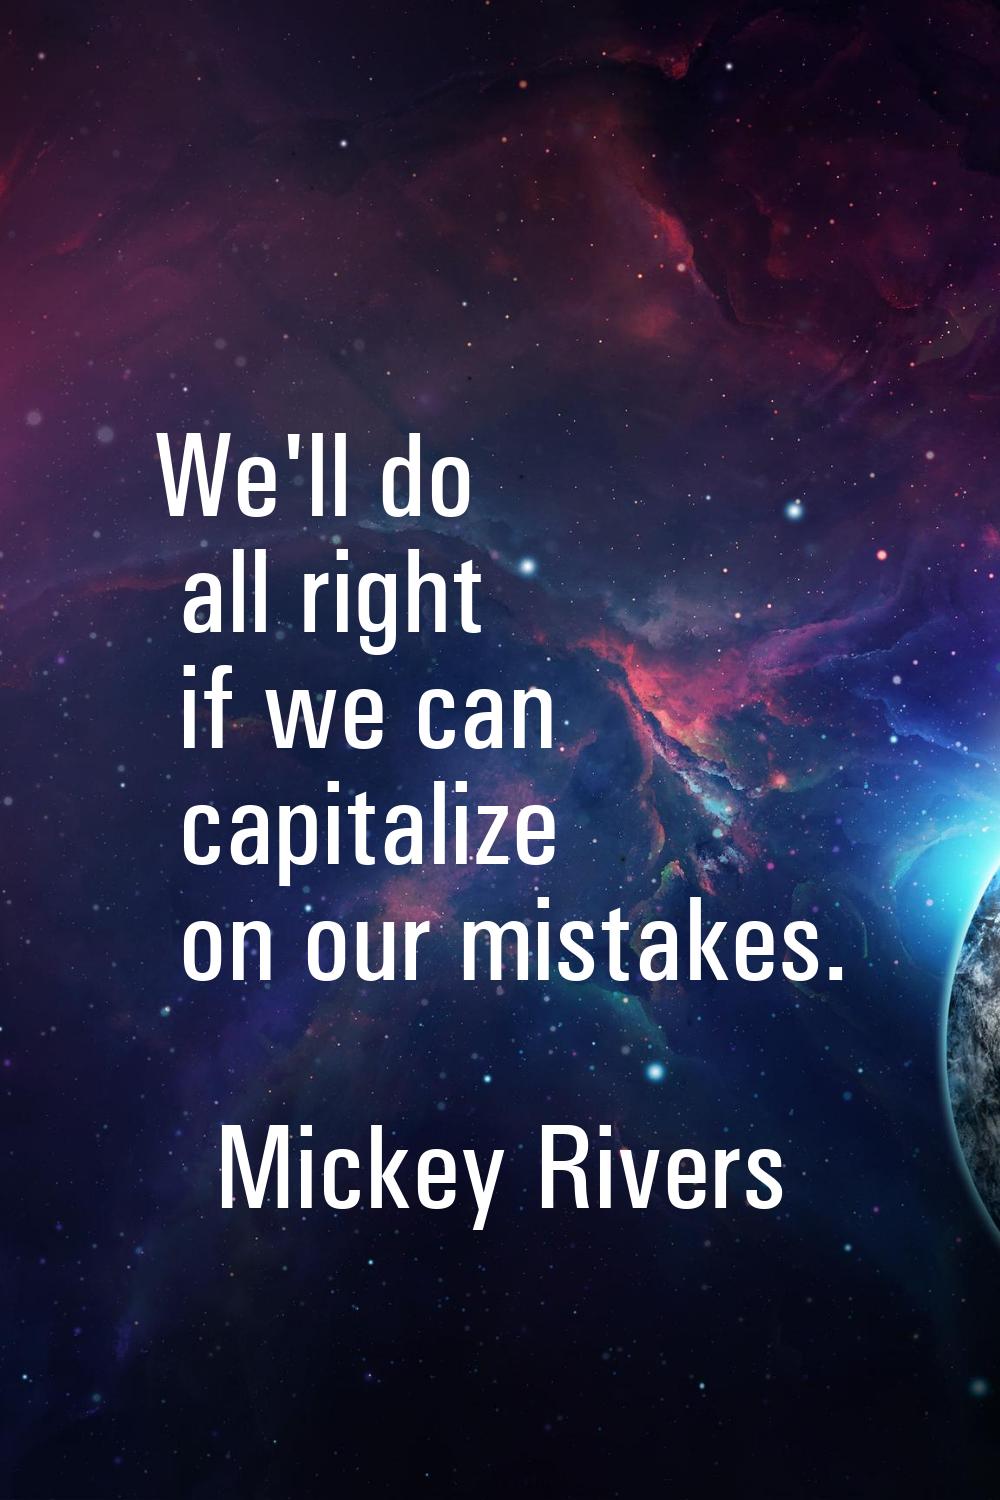 We'll do all right if we can capitalize on our mistakes.